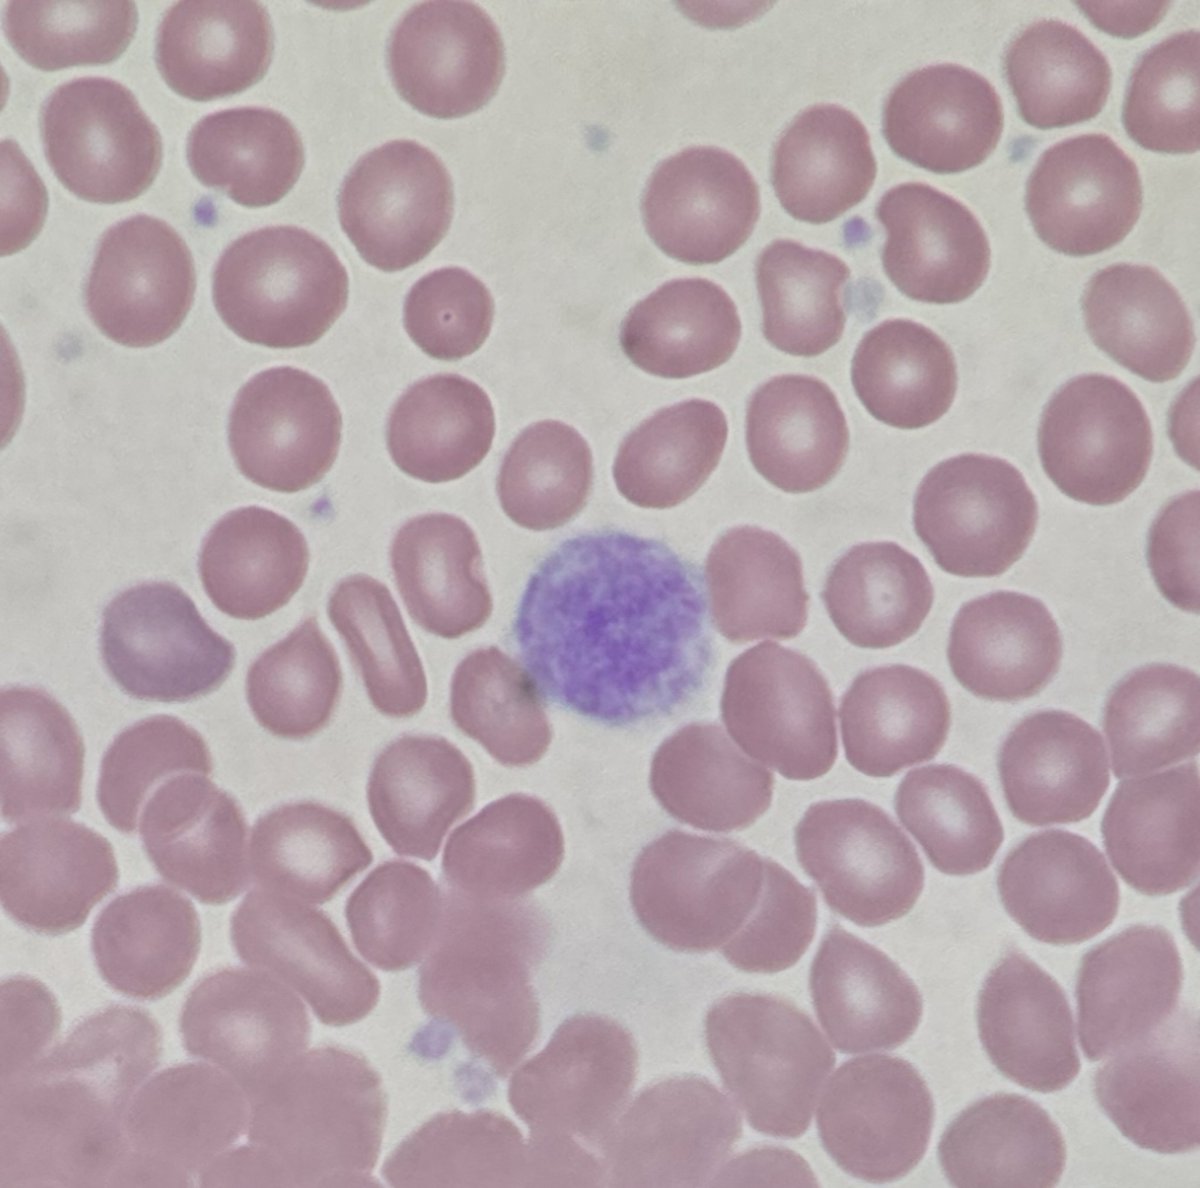 Haven't posted in a while, so here is the giant platelet of the day! I hope everyone is learning and strengthening the pathology community in Baltimore this week. ##pathtwitter